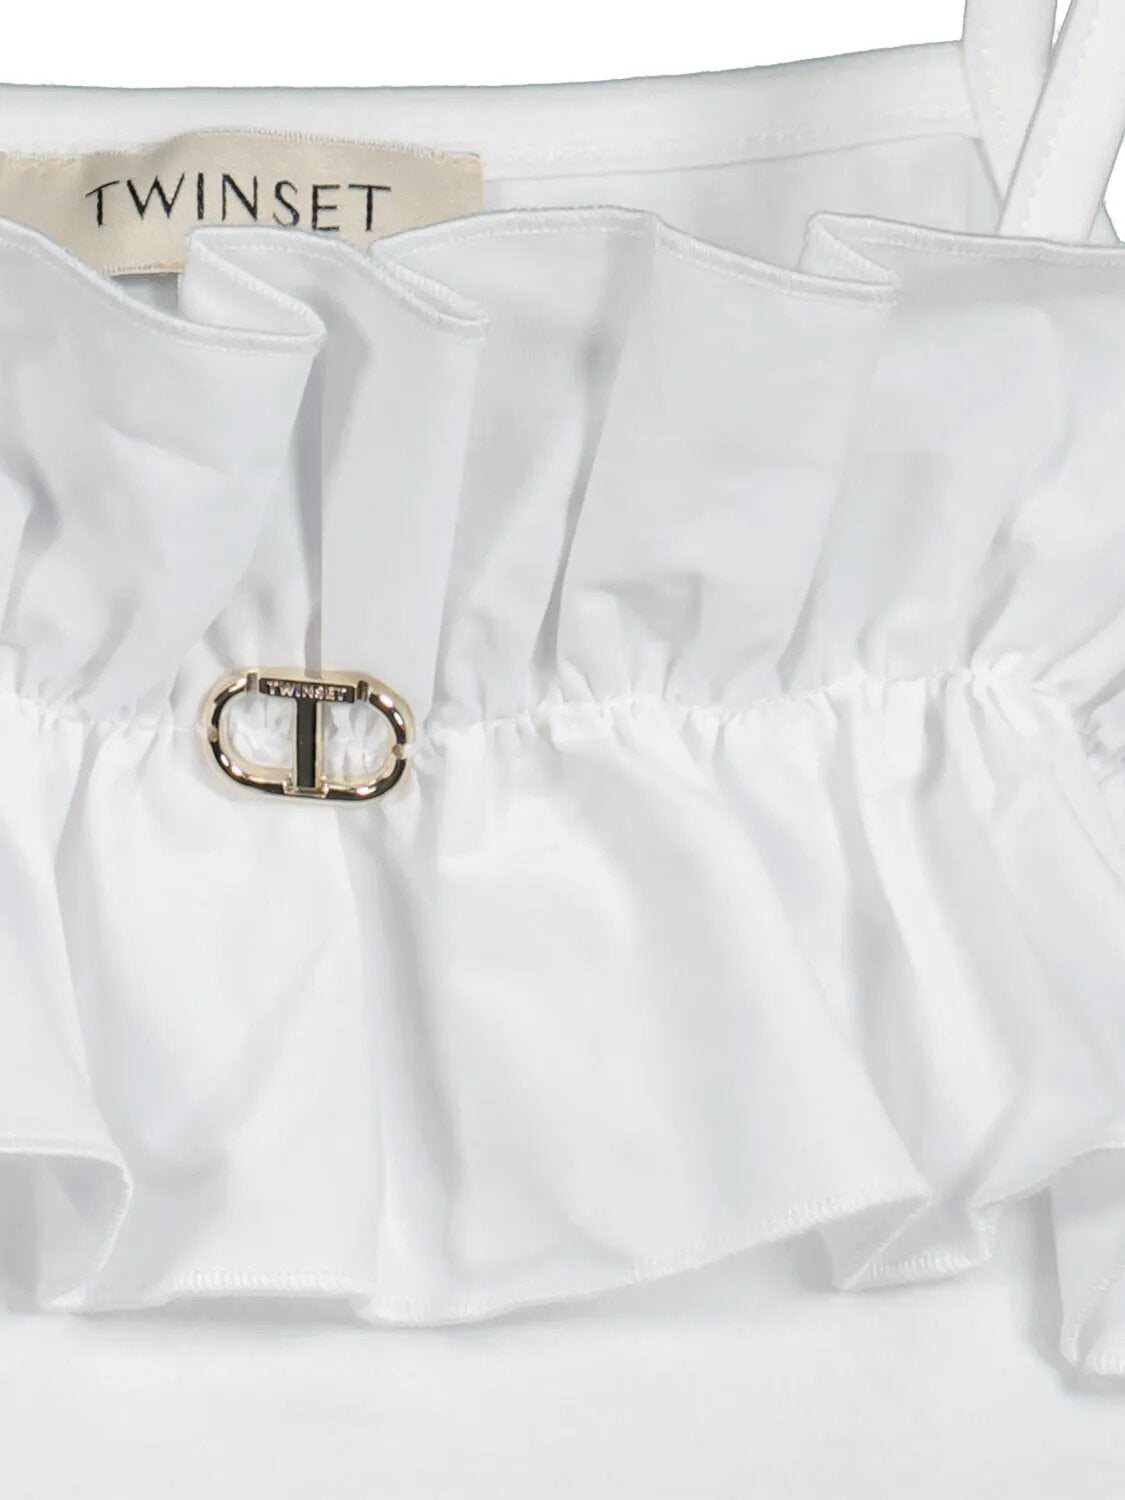 Twinset Girl's cotton top white